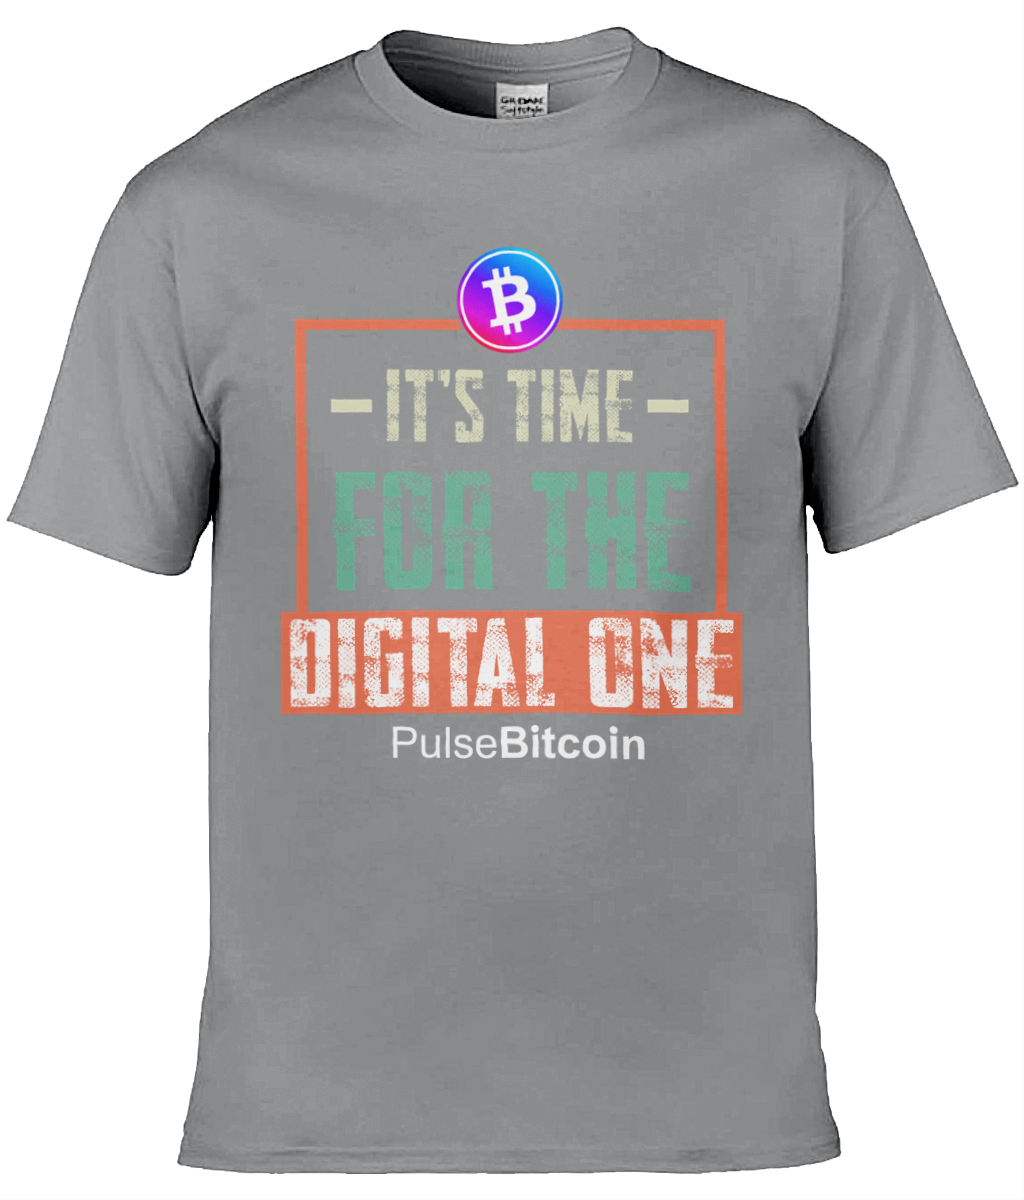 It's Time for The Digital One T-shirt, PulseBitcoin Unisex T-shirt